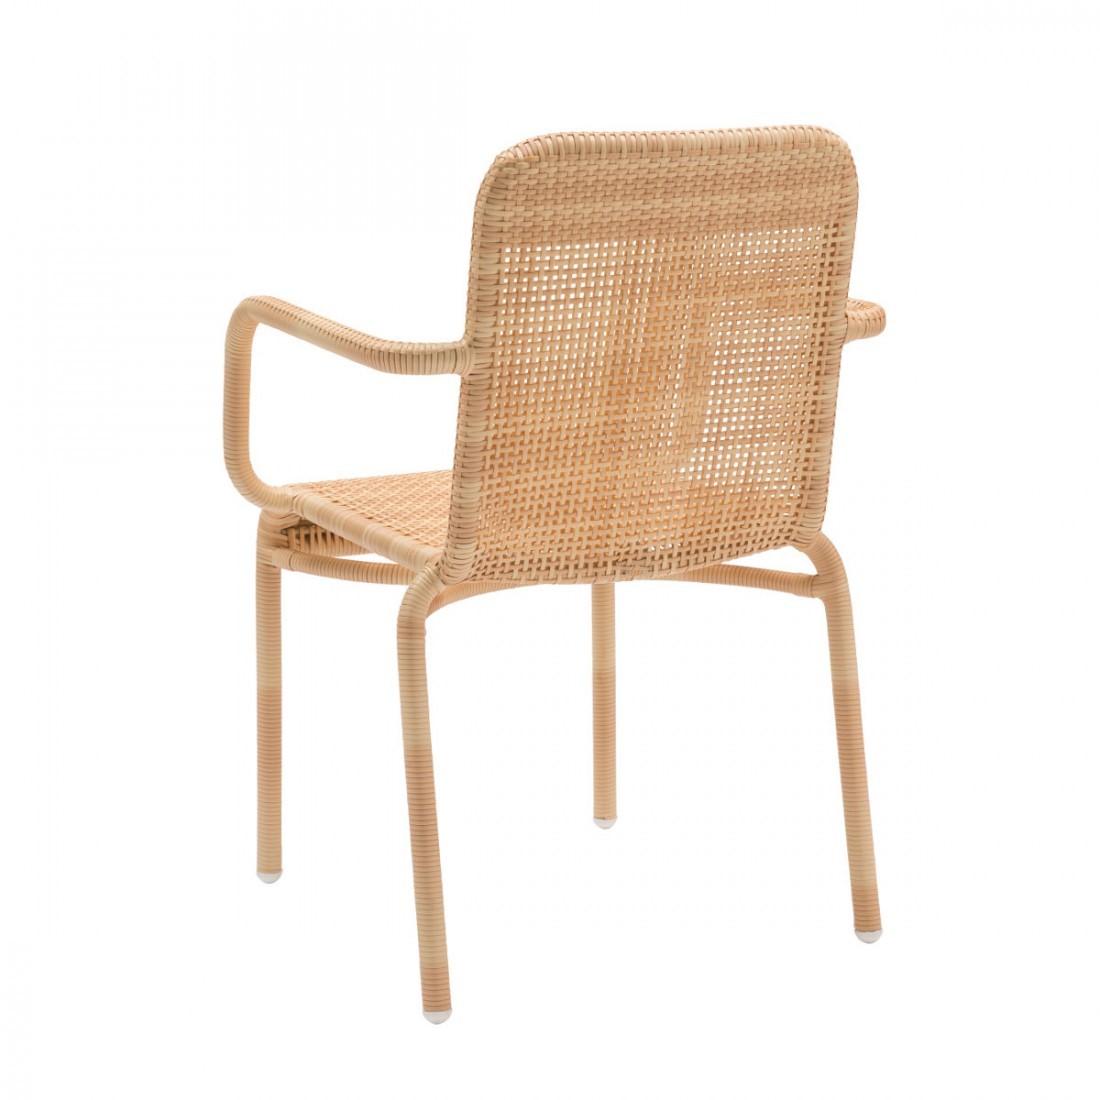 Mid-Century Modern French Design and Braided Resin Rattan Effect Outdoor Armchair